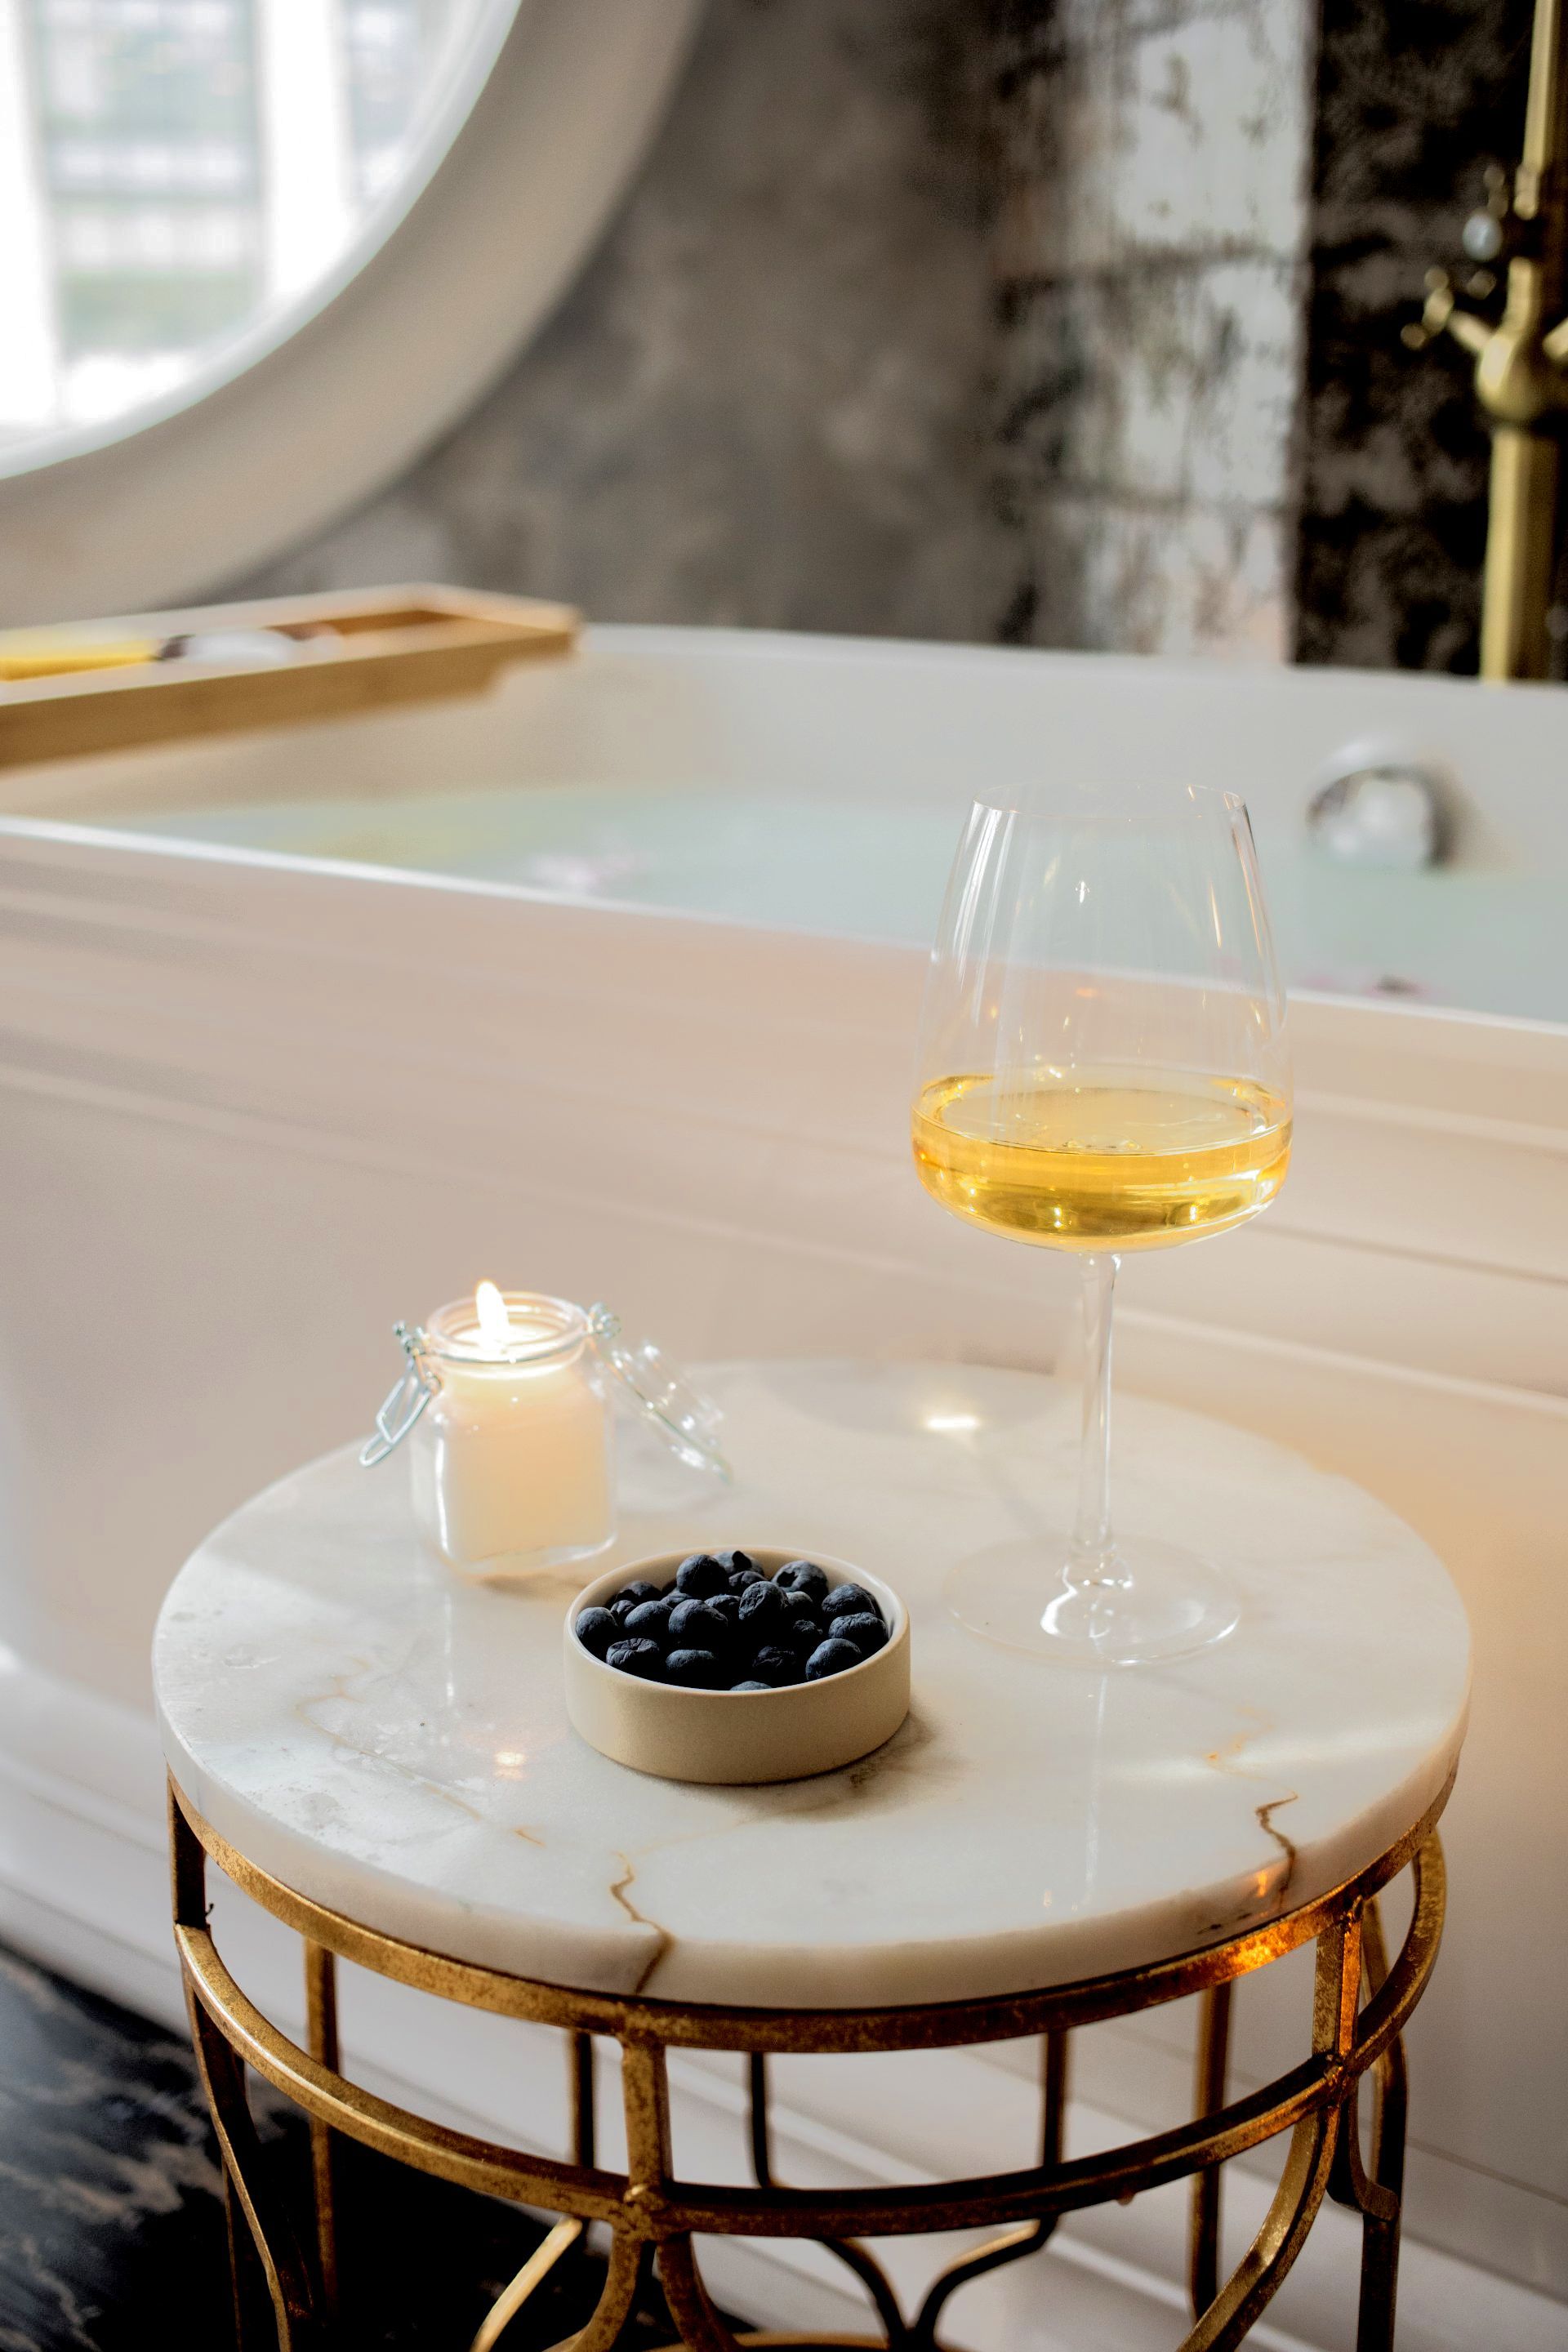 Relaxing bath with wine and berries in a clean bathroom